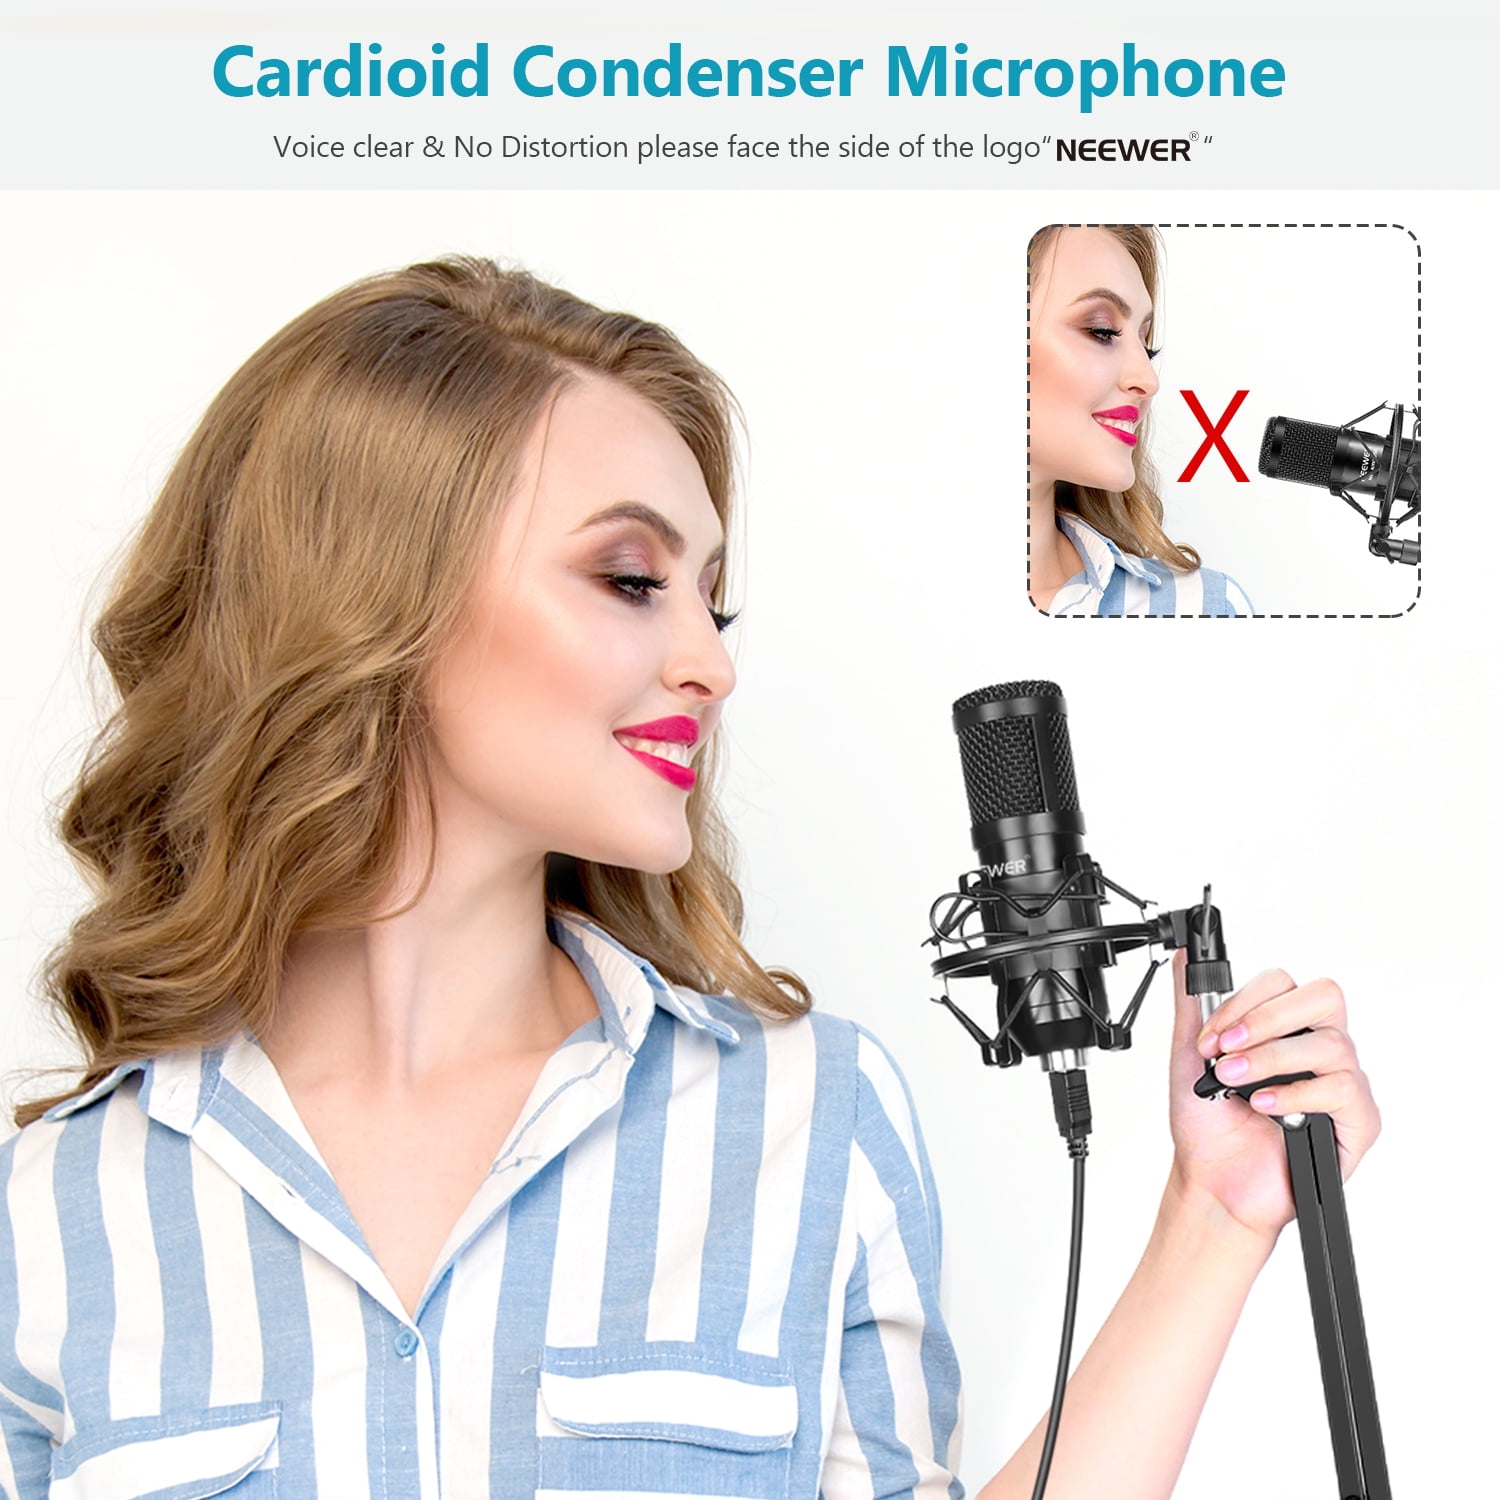 Blue Neewer USB Microphone Kit Supercardioid Condenser Microphone with Boom Arm and Shock Mount for YouTube Vlogging Plug&Play and Skype Calls Podcasting Game Streaming 